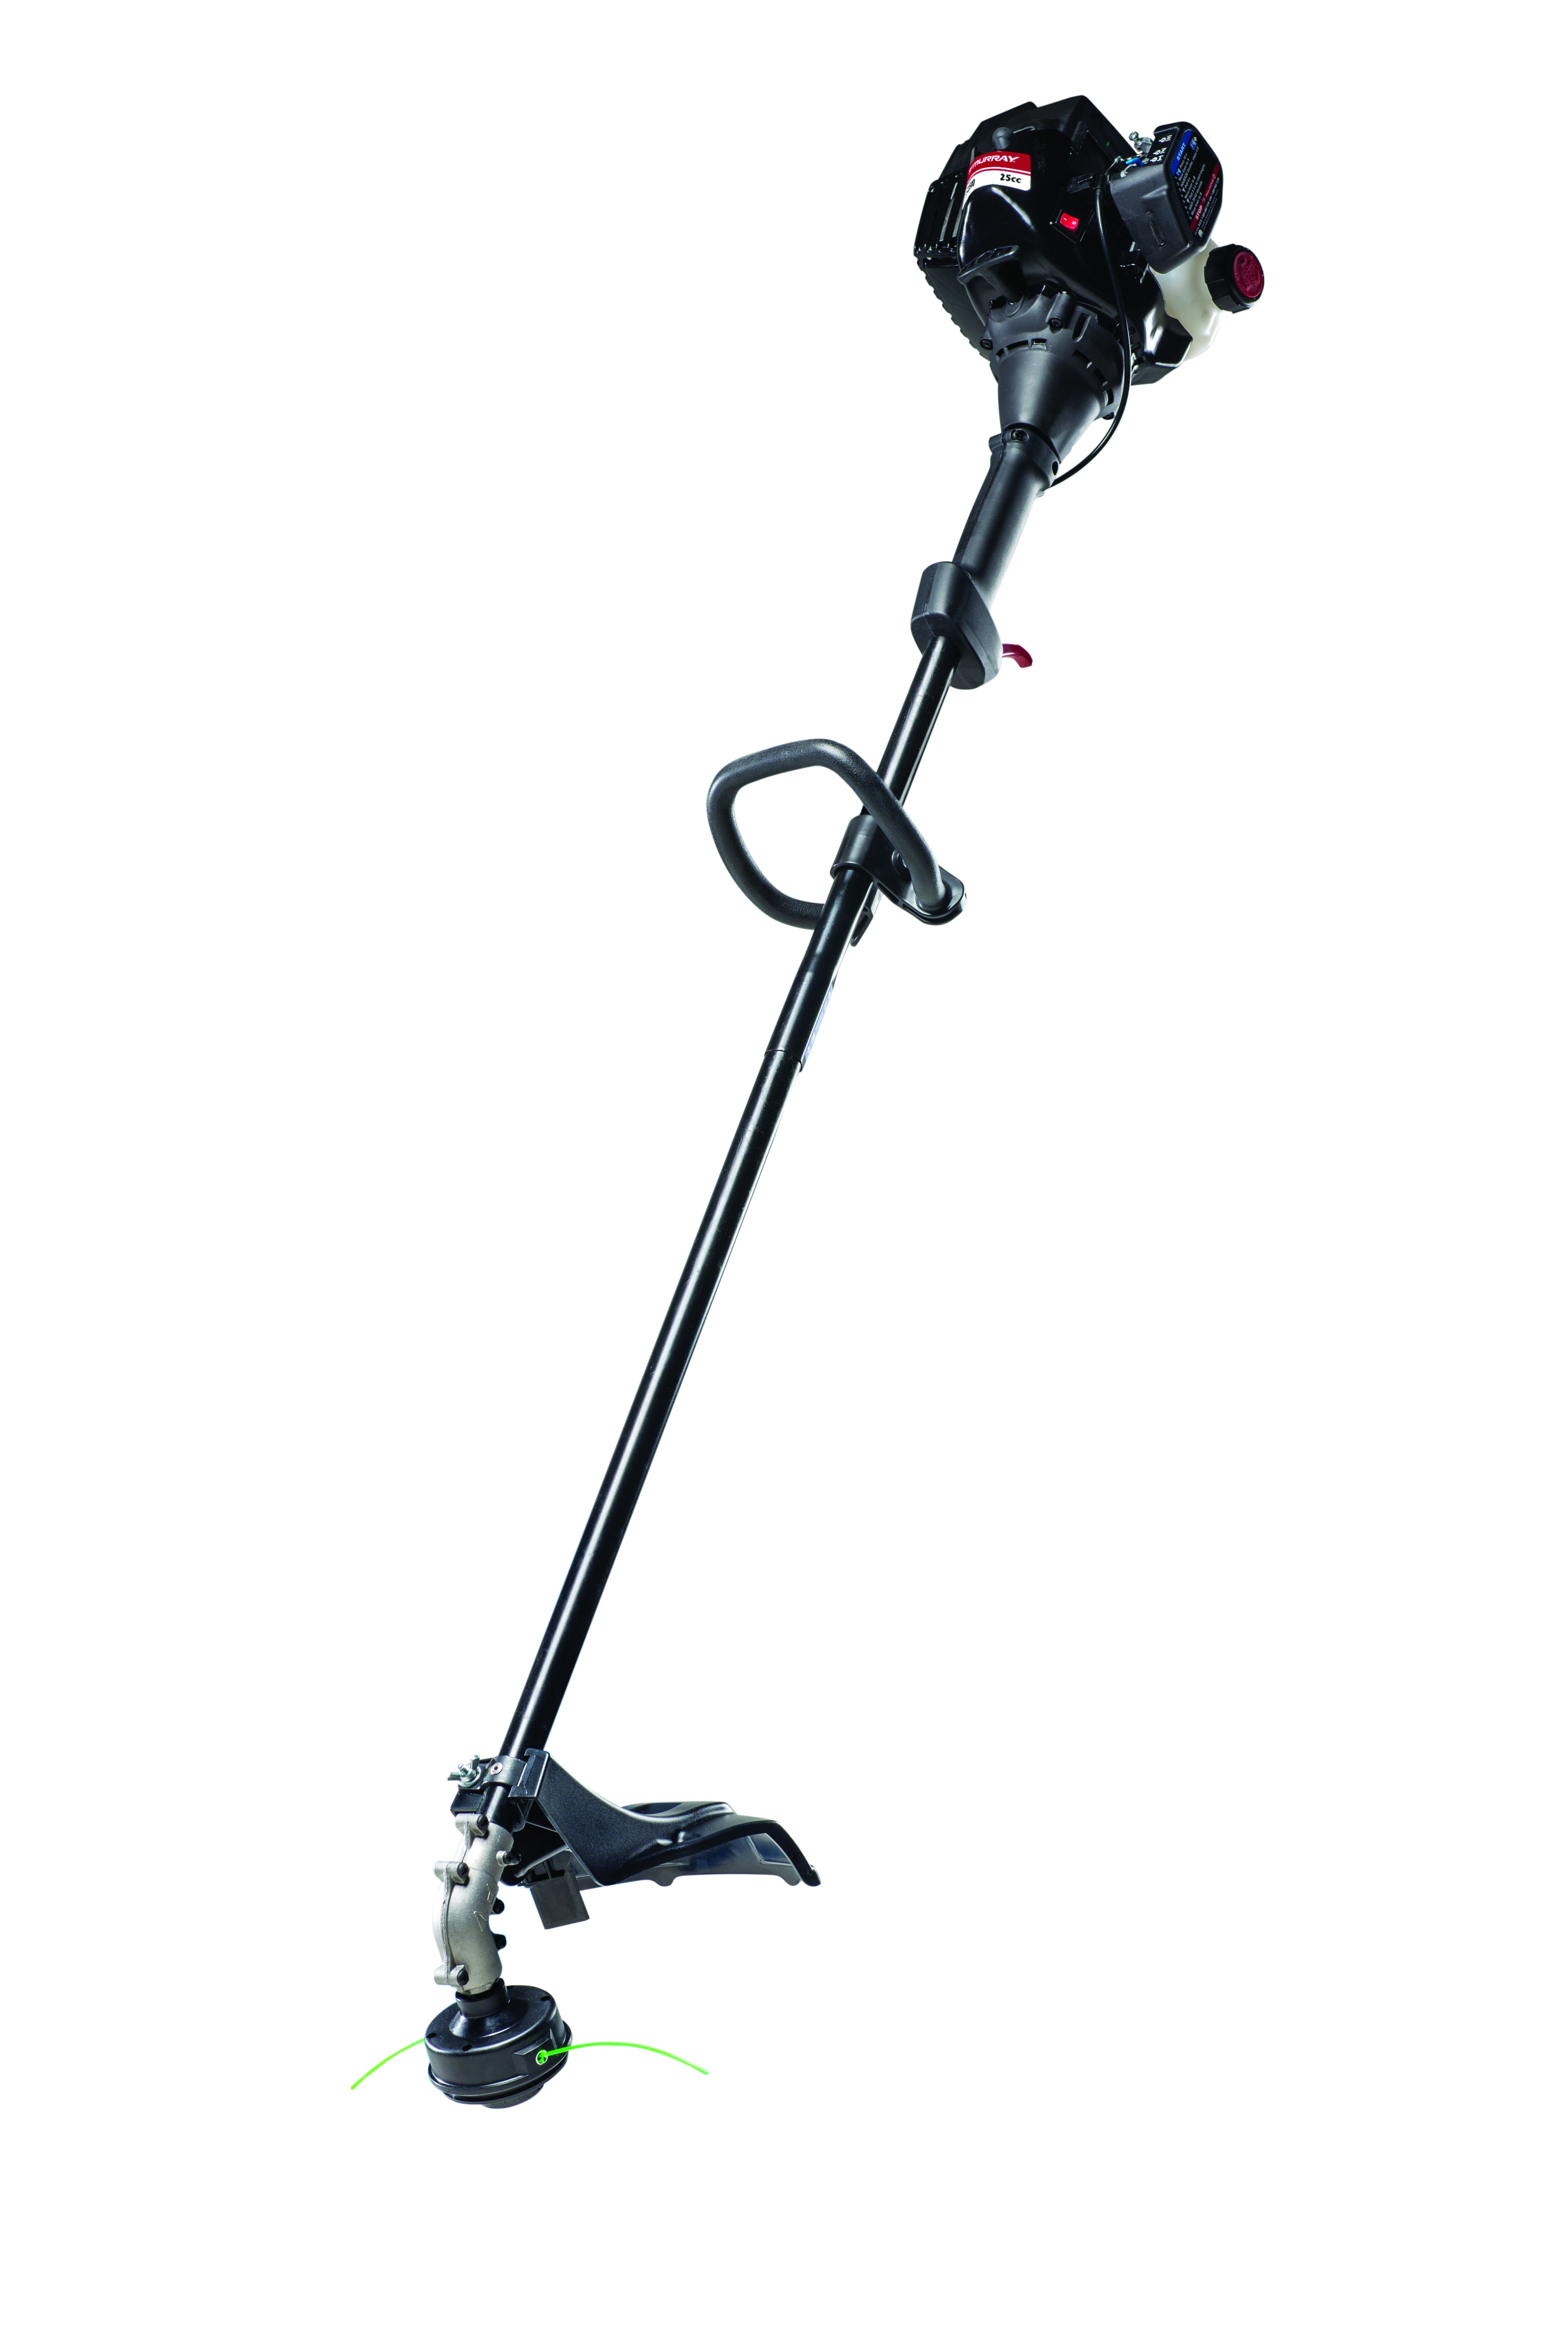 Murray 16" 2-Cycle 25cc Gas-Powered Straight Shaft String Trimmer - image 3 of 5